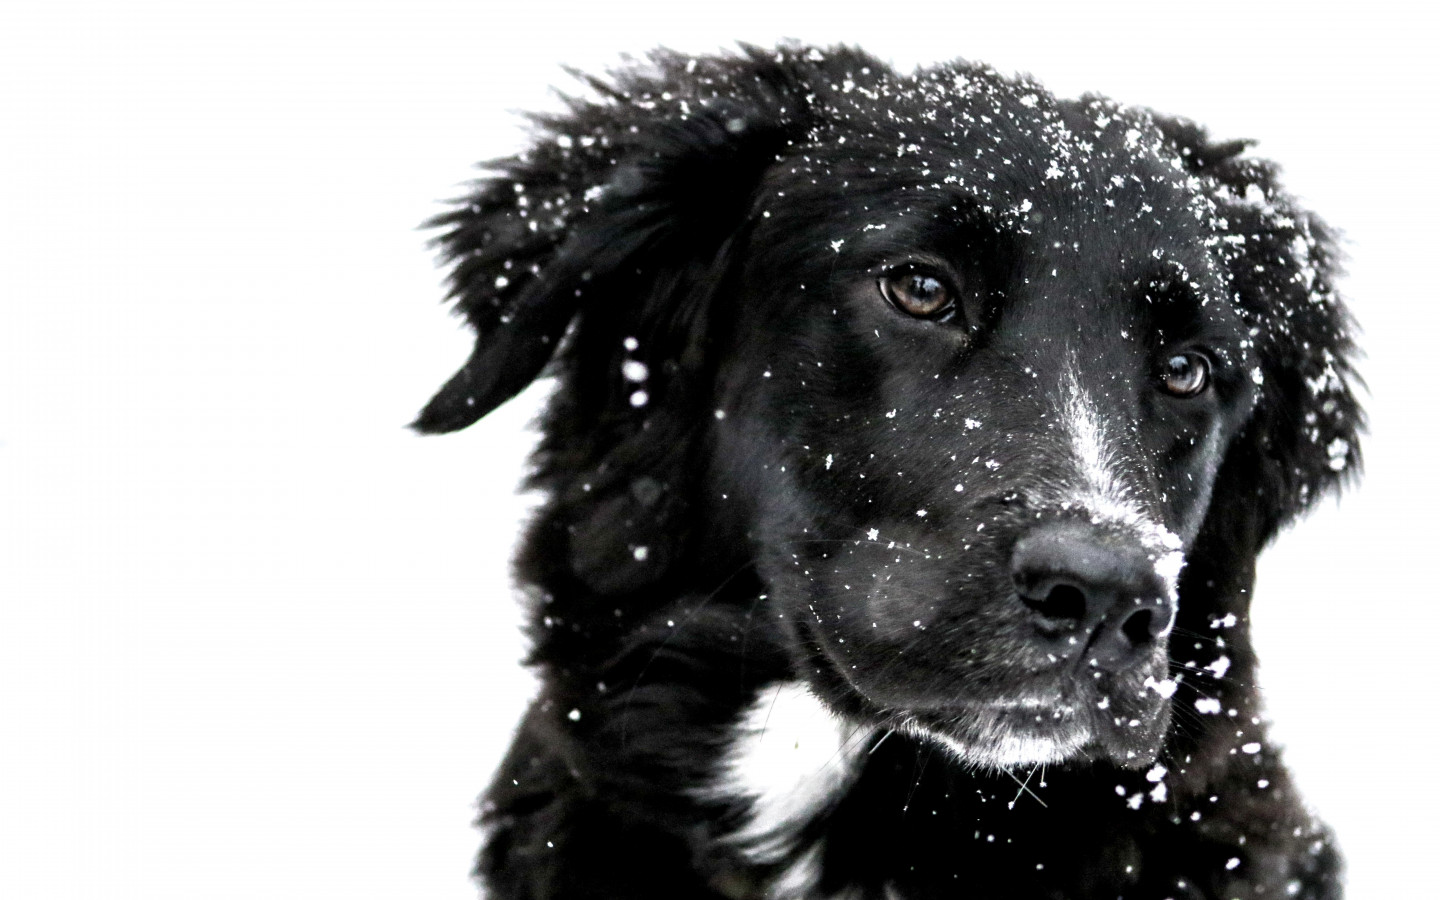 Snowing over the cute dog wallpaper 1440x900